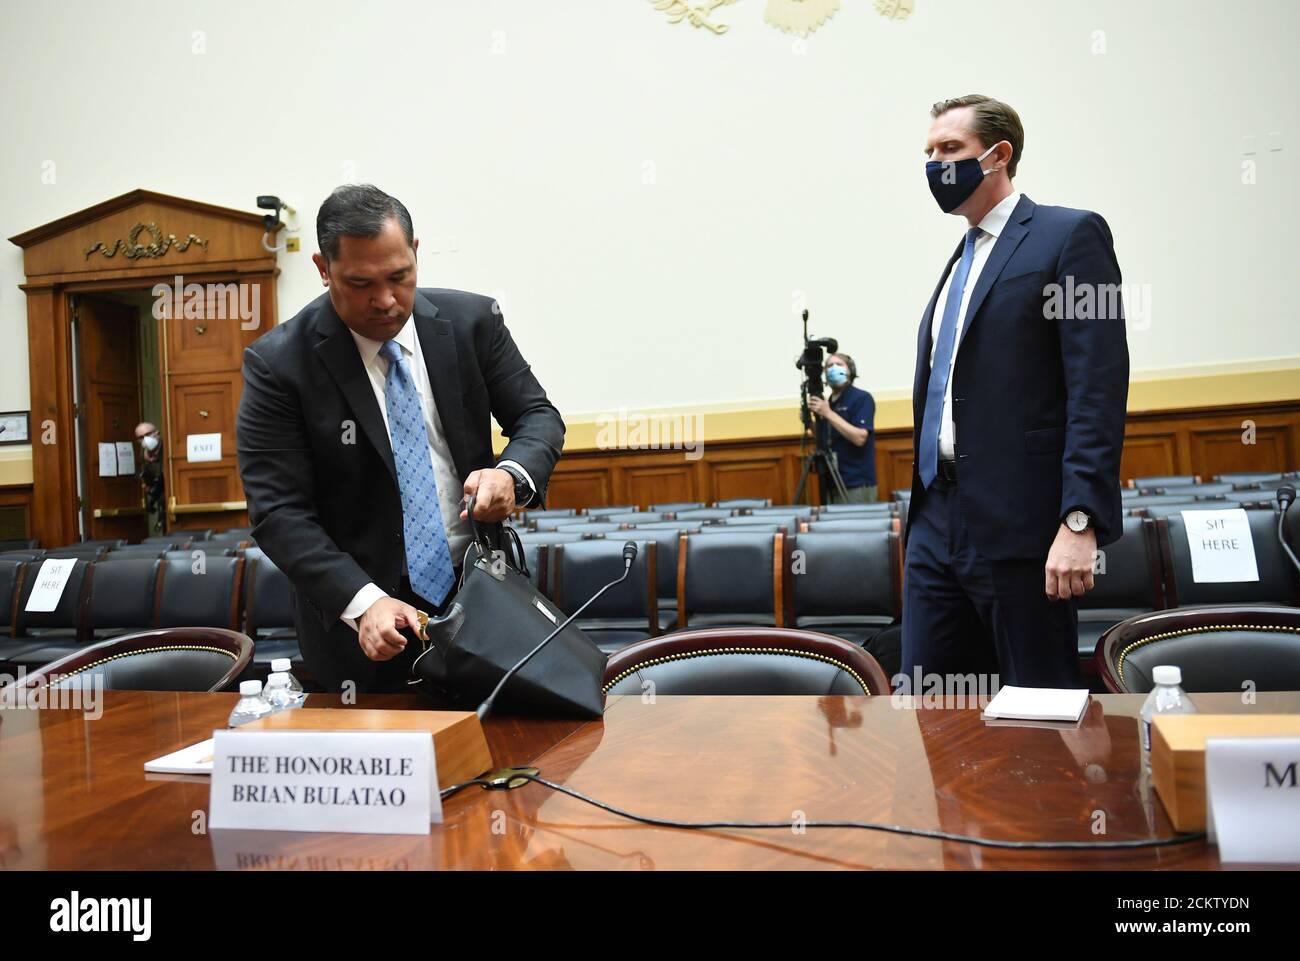 Washington, United States. 16th Sep, 2020. Brian Bulatao (L), Under Secretary of State for Management, and Marik String, Acting Legal Adviser for the State Department, pack up after testifying before a House Committee on Foreign Affairs hearing looking into the firing of State Department Inspector General Steven Linick, on Capitol Hill in Washington, DC on Wednesday, September 16, 2020. Photo by Kevin Dietsch/UPI Credit: UPI/Alamy Live News Stock Photo